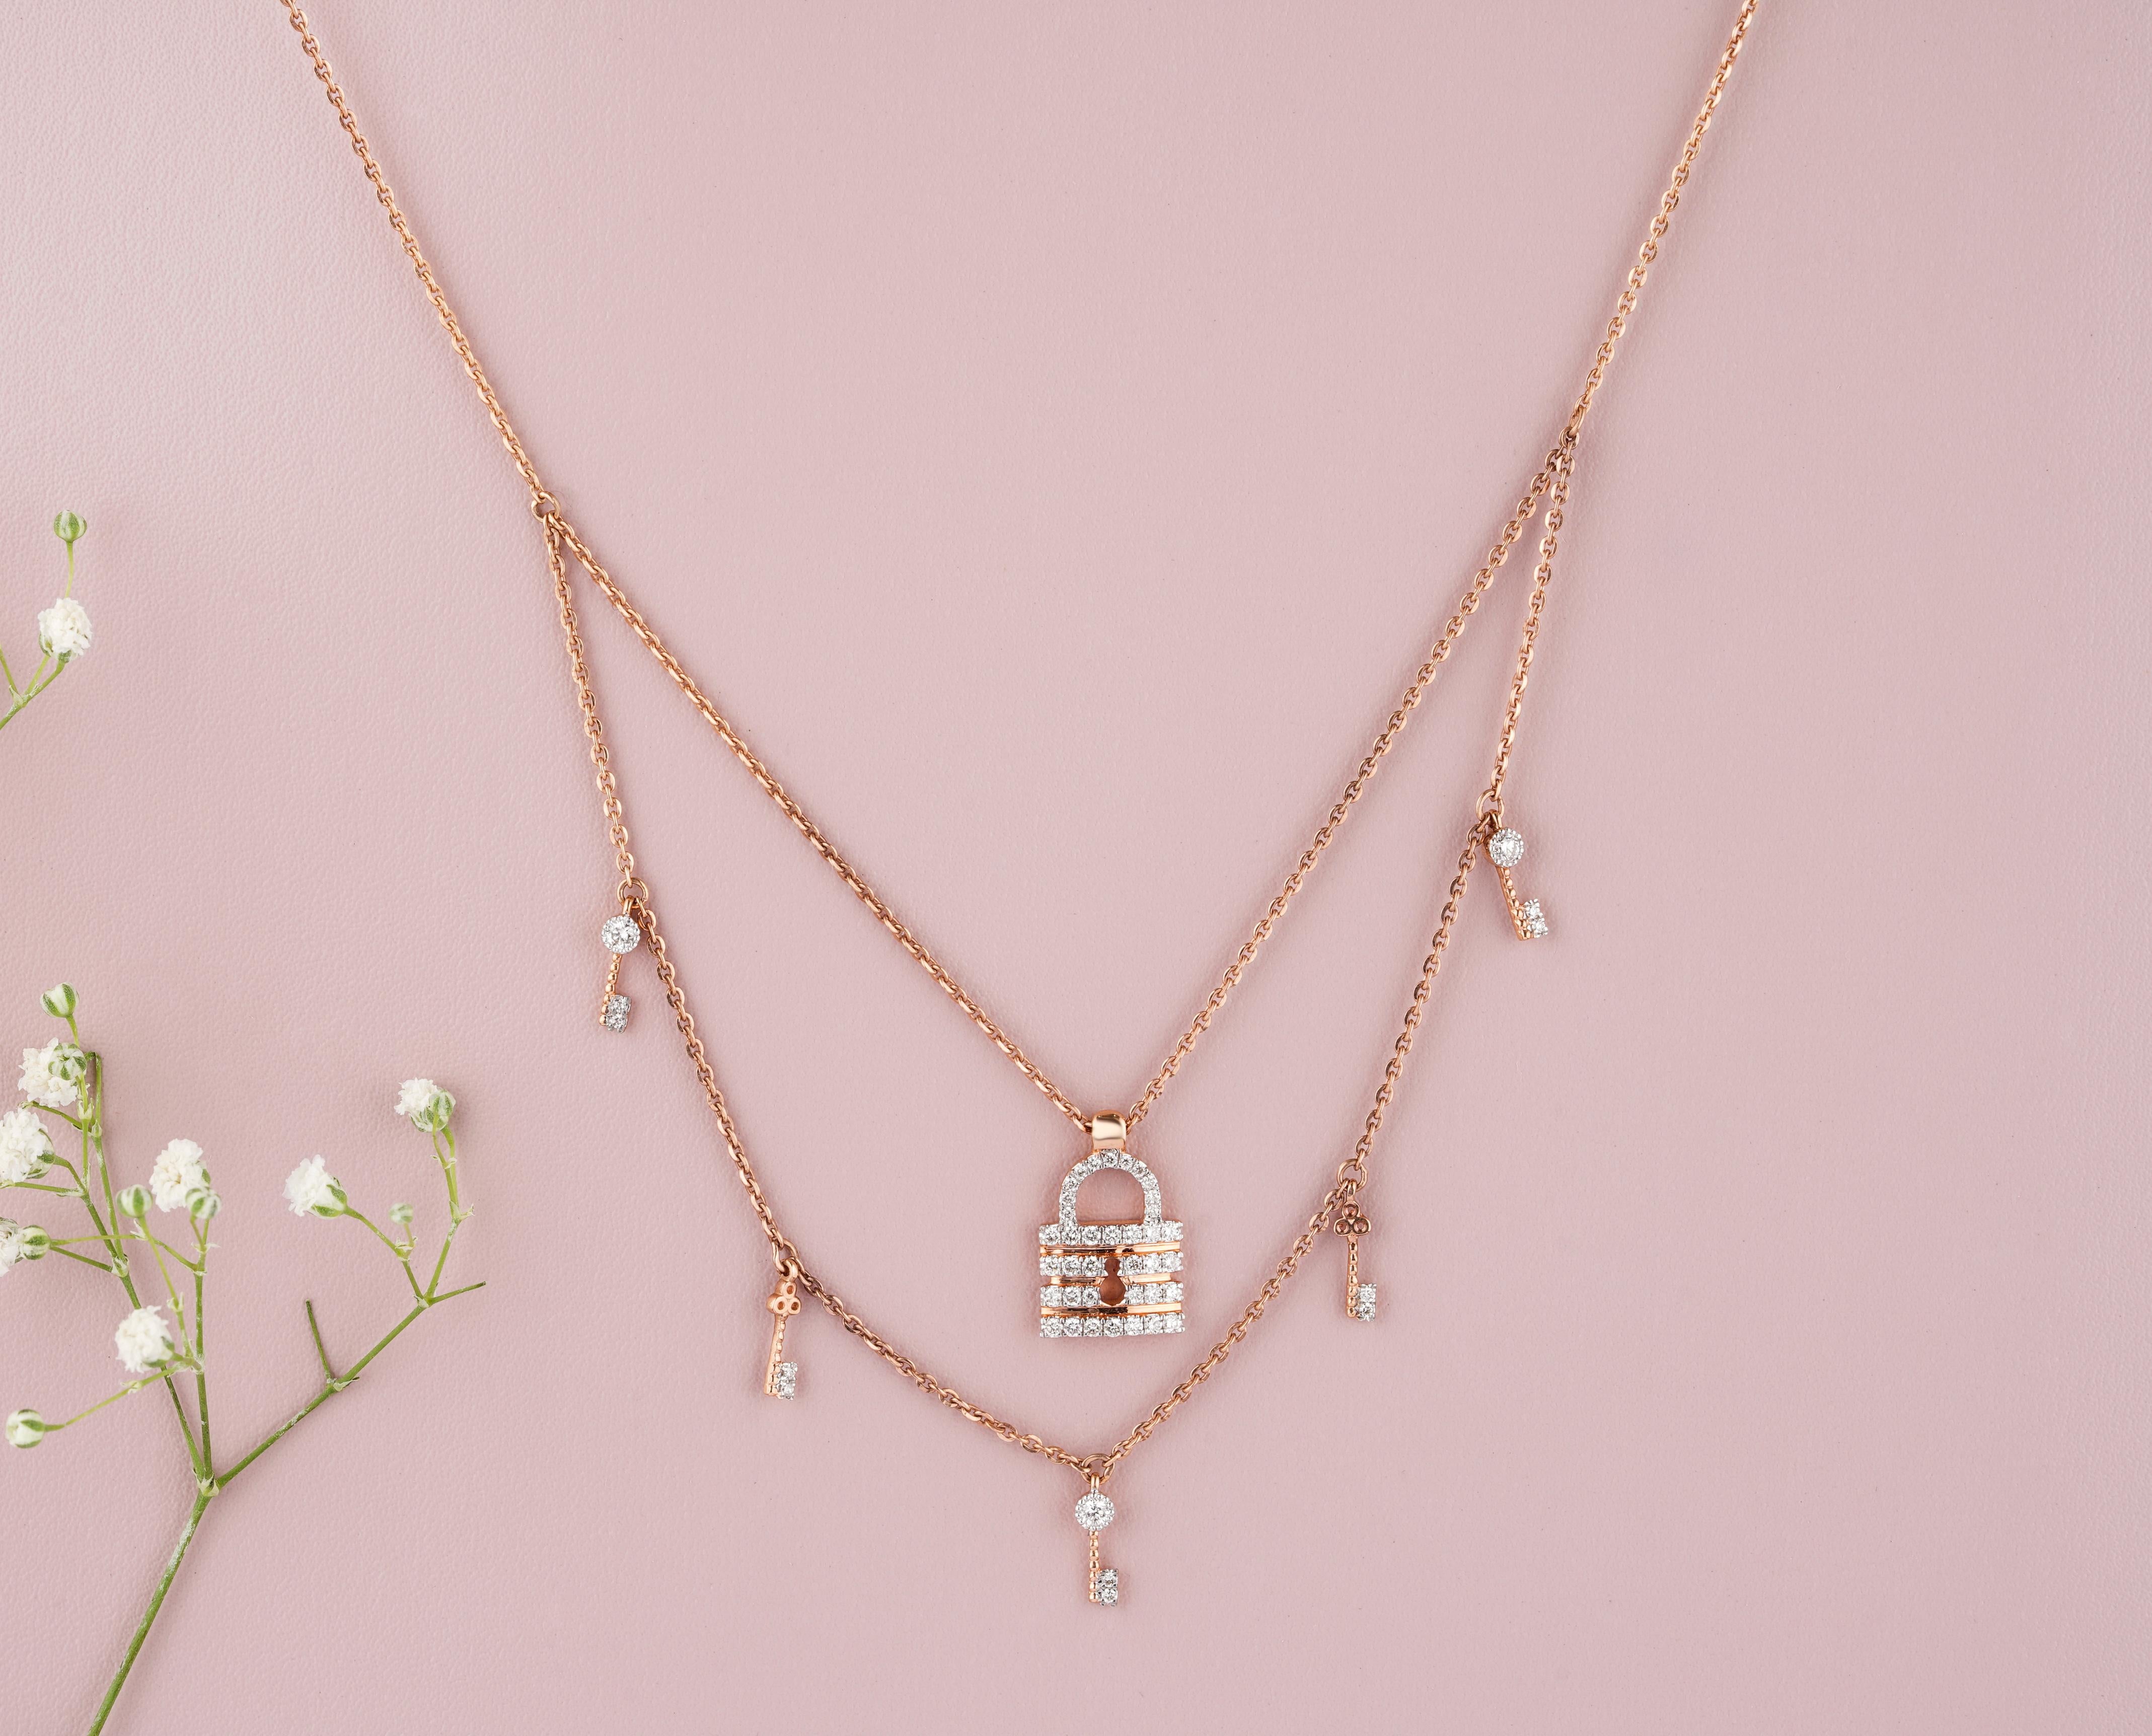 The Lock & Key Diamond Charms Necklace is a stunning piece of jewelry made from 18k solid gold. It features a double-layered design, with one layer showcasing a lock charm and another featuring key charms. The lock pendant is adorned with exquisite